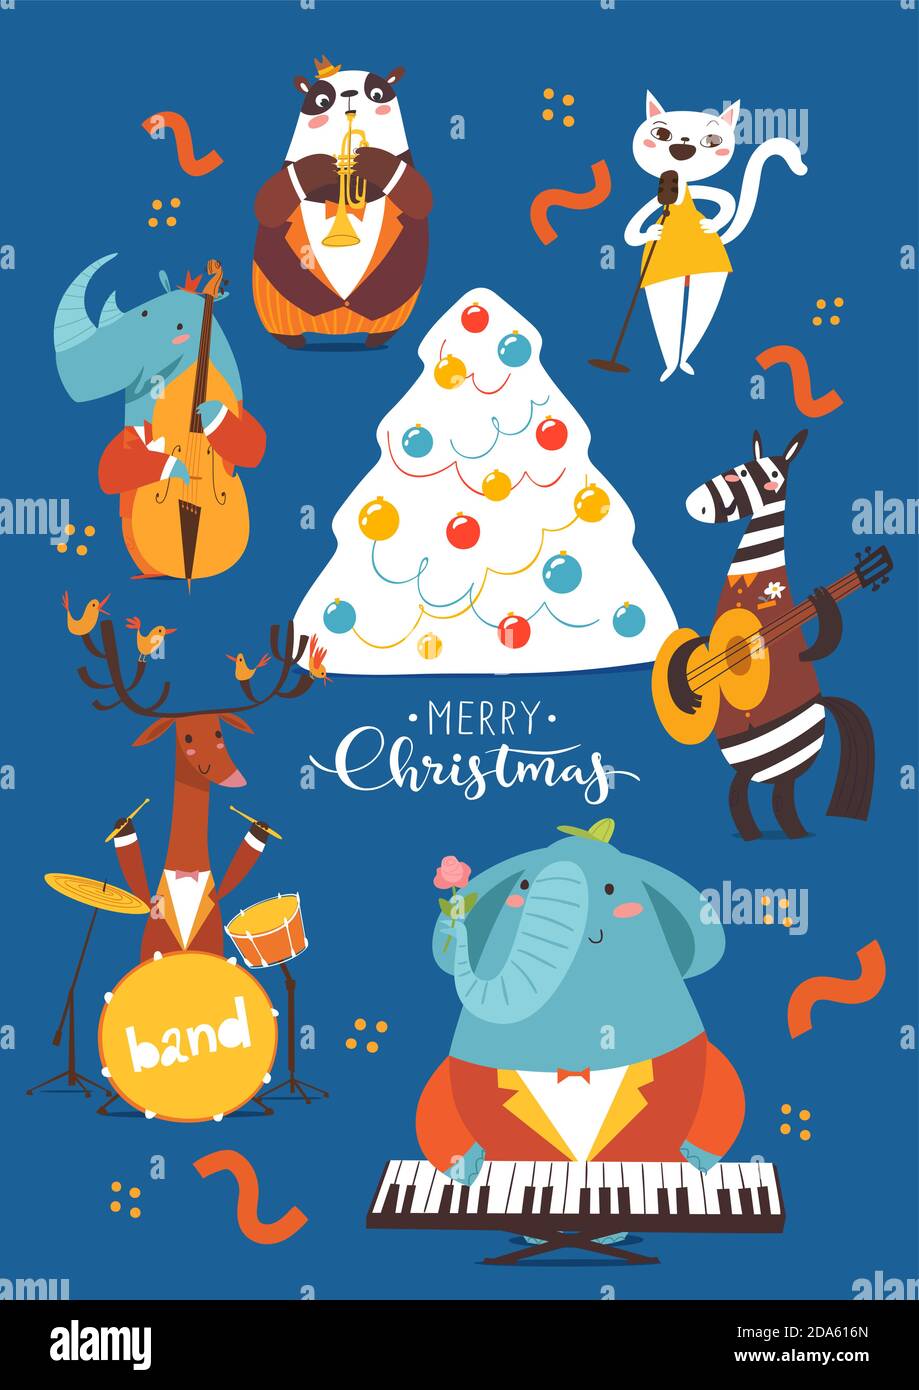 Christmas cartoon poster with cute jazz musicians characters. Stock Vector